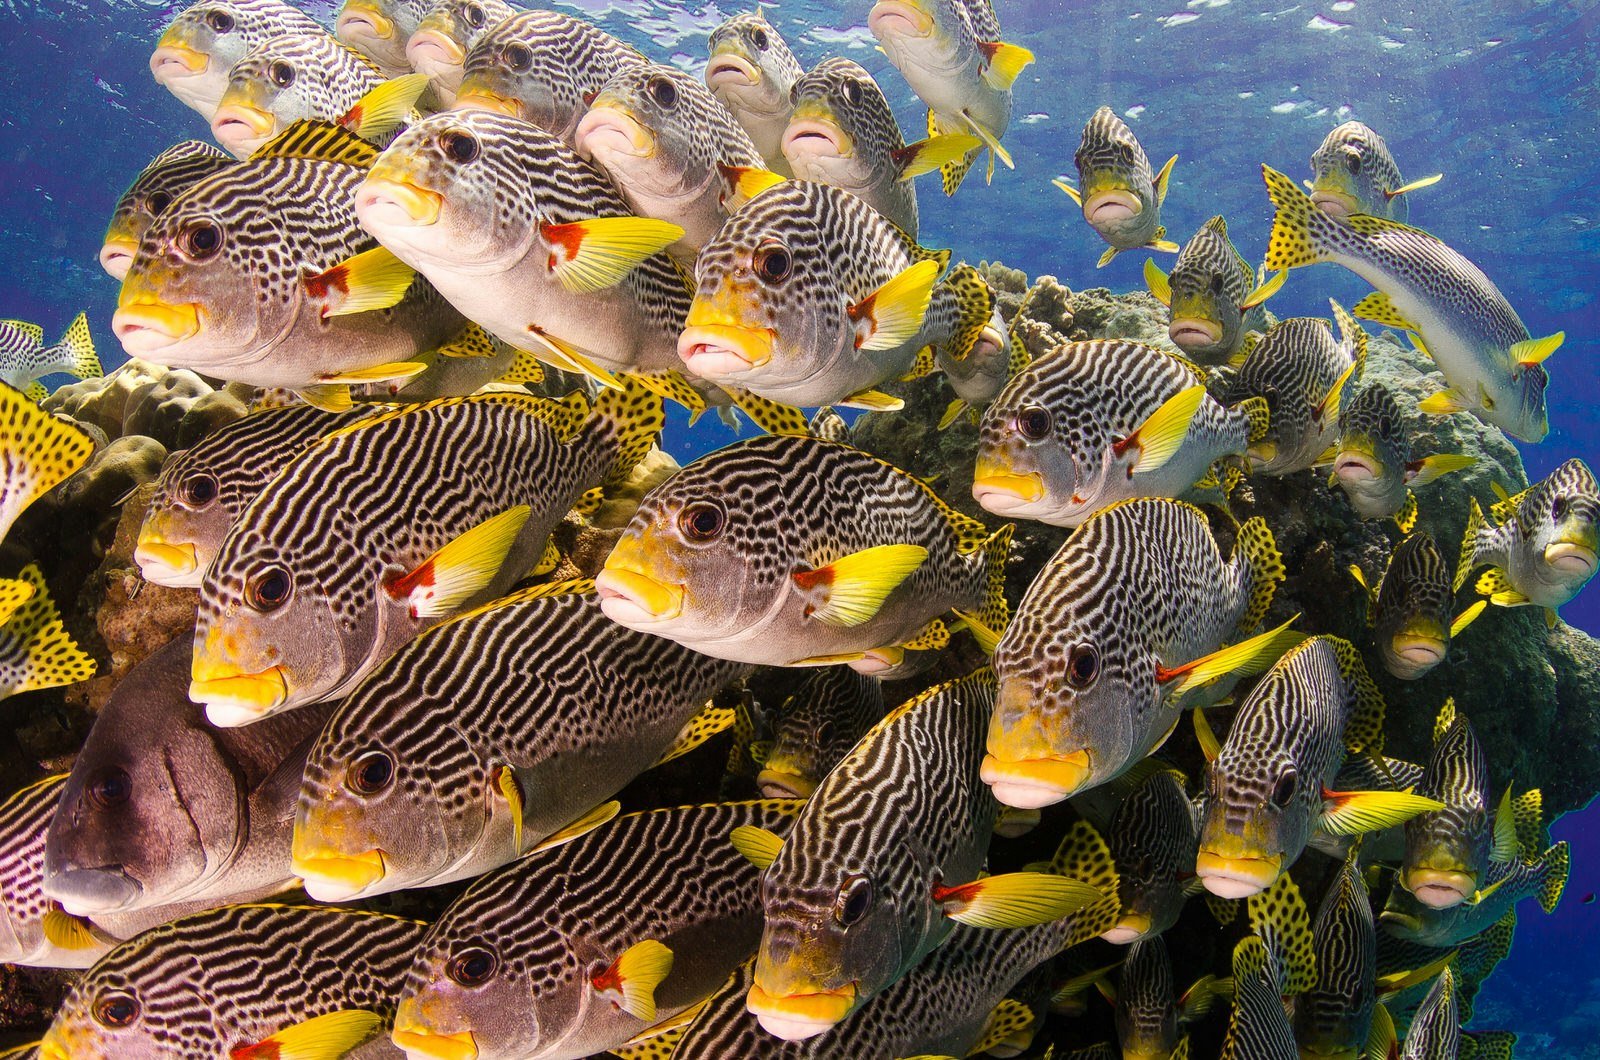 A school of dozens of stripy black and white fish with yellow fins and mouths called 'sweet-lips' on Australia's Great Barrier Reef